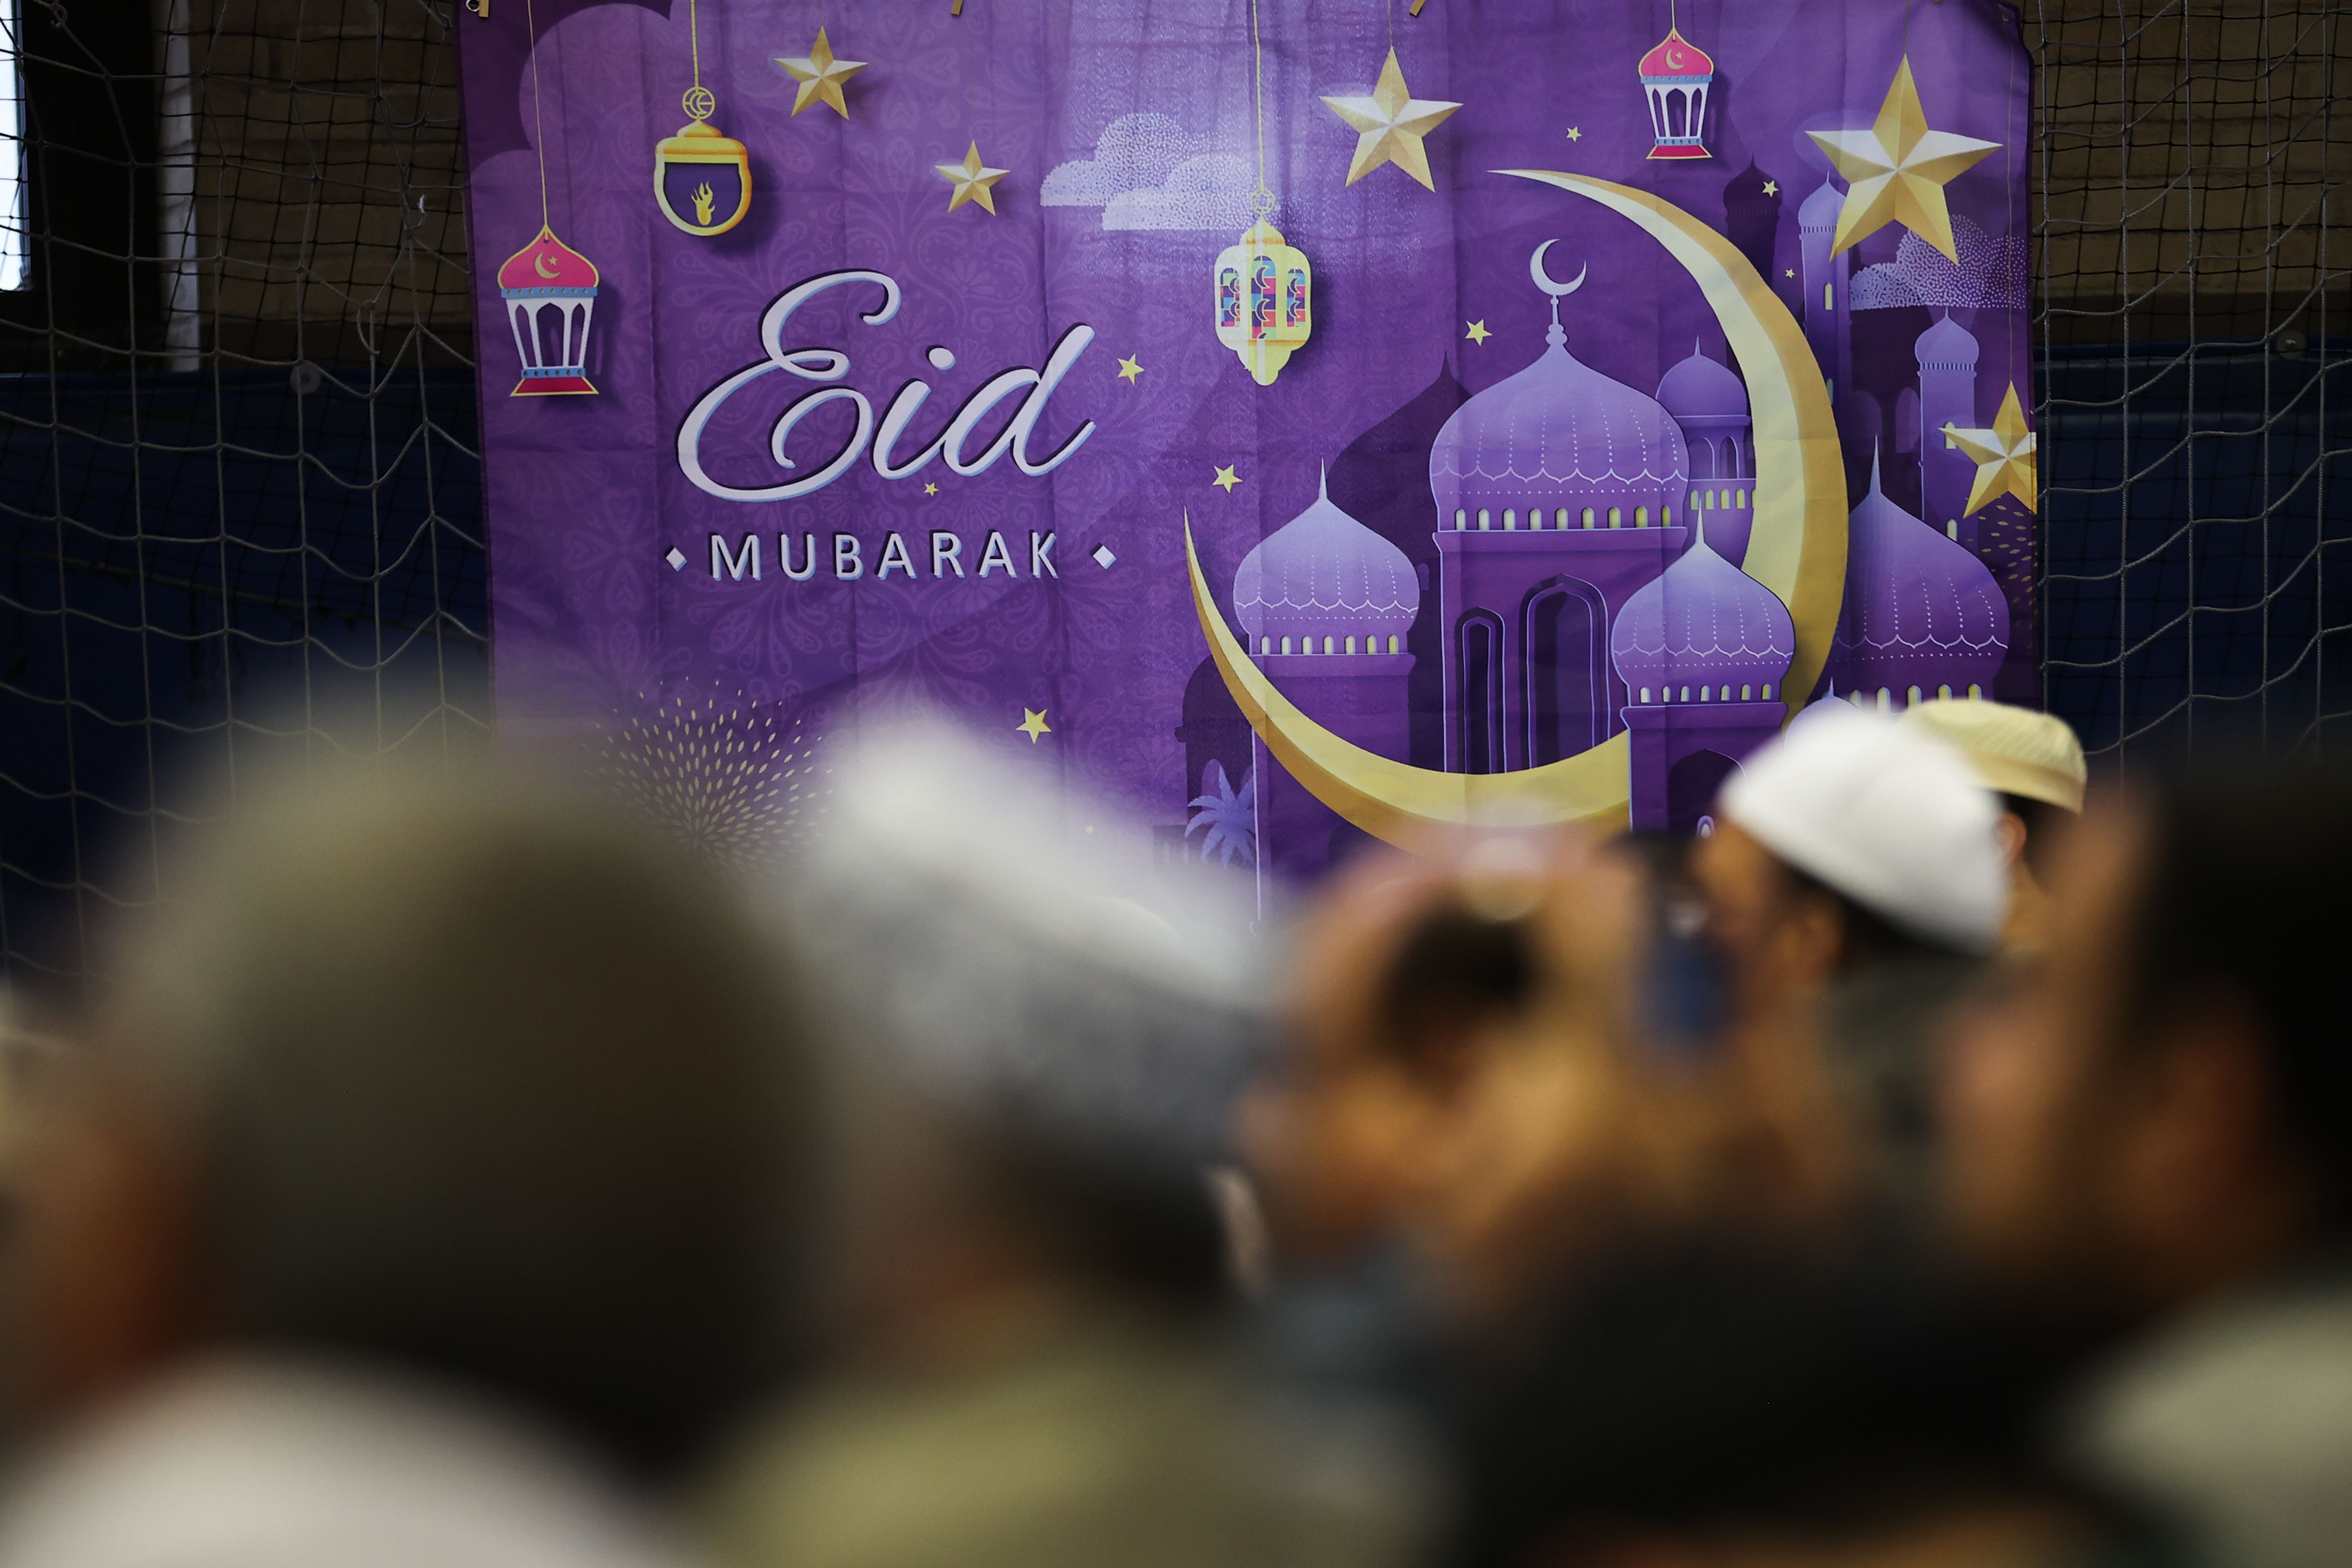 Eid al-Fitr, the Muslim festival marking the end of the fast of Ramadan is celebrated at the Teaneck National Guard Armory in New Jersey, United States on May 2, 2022